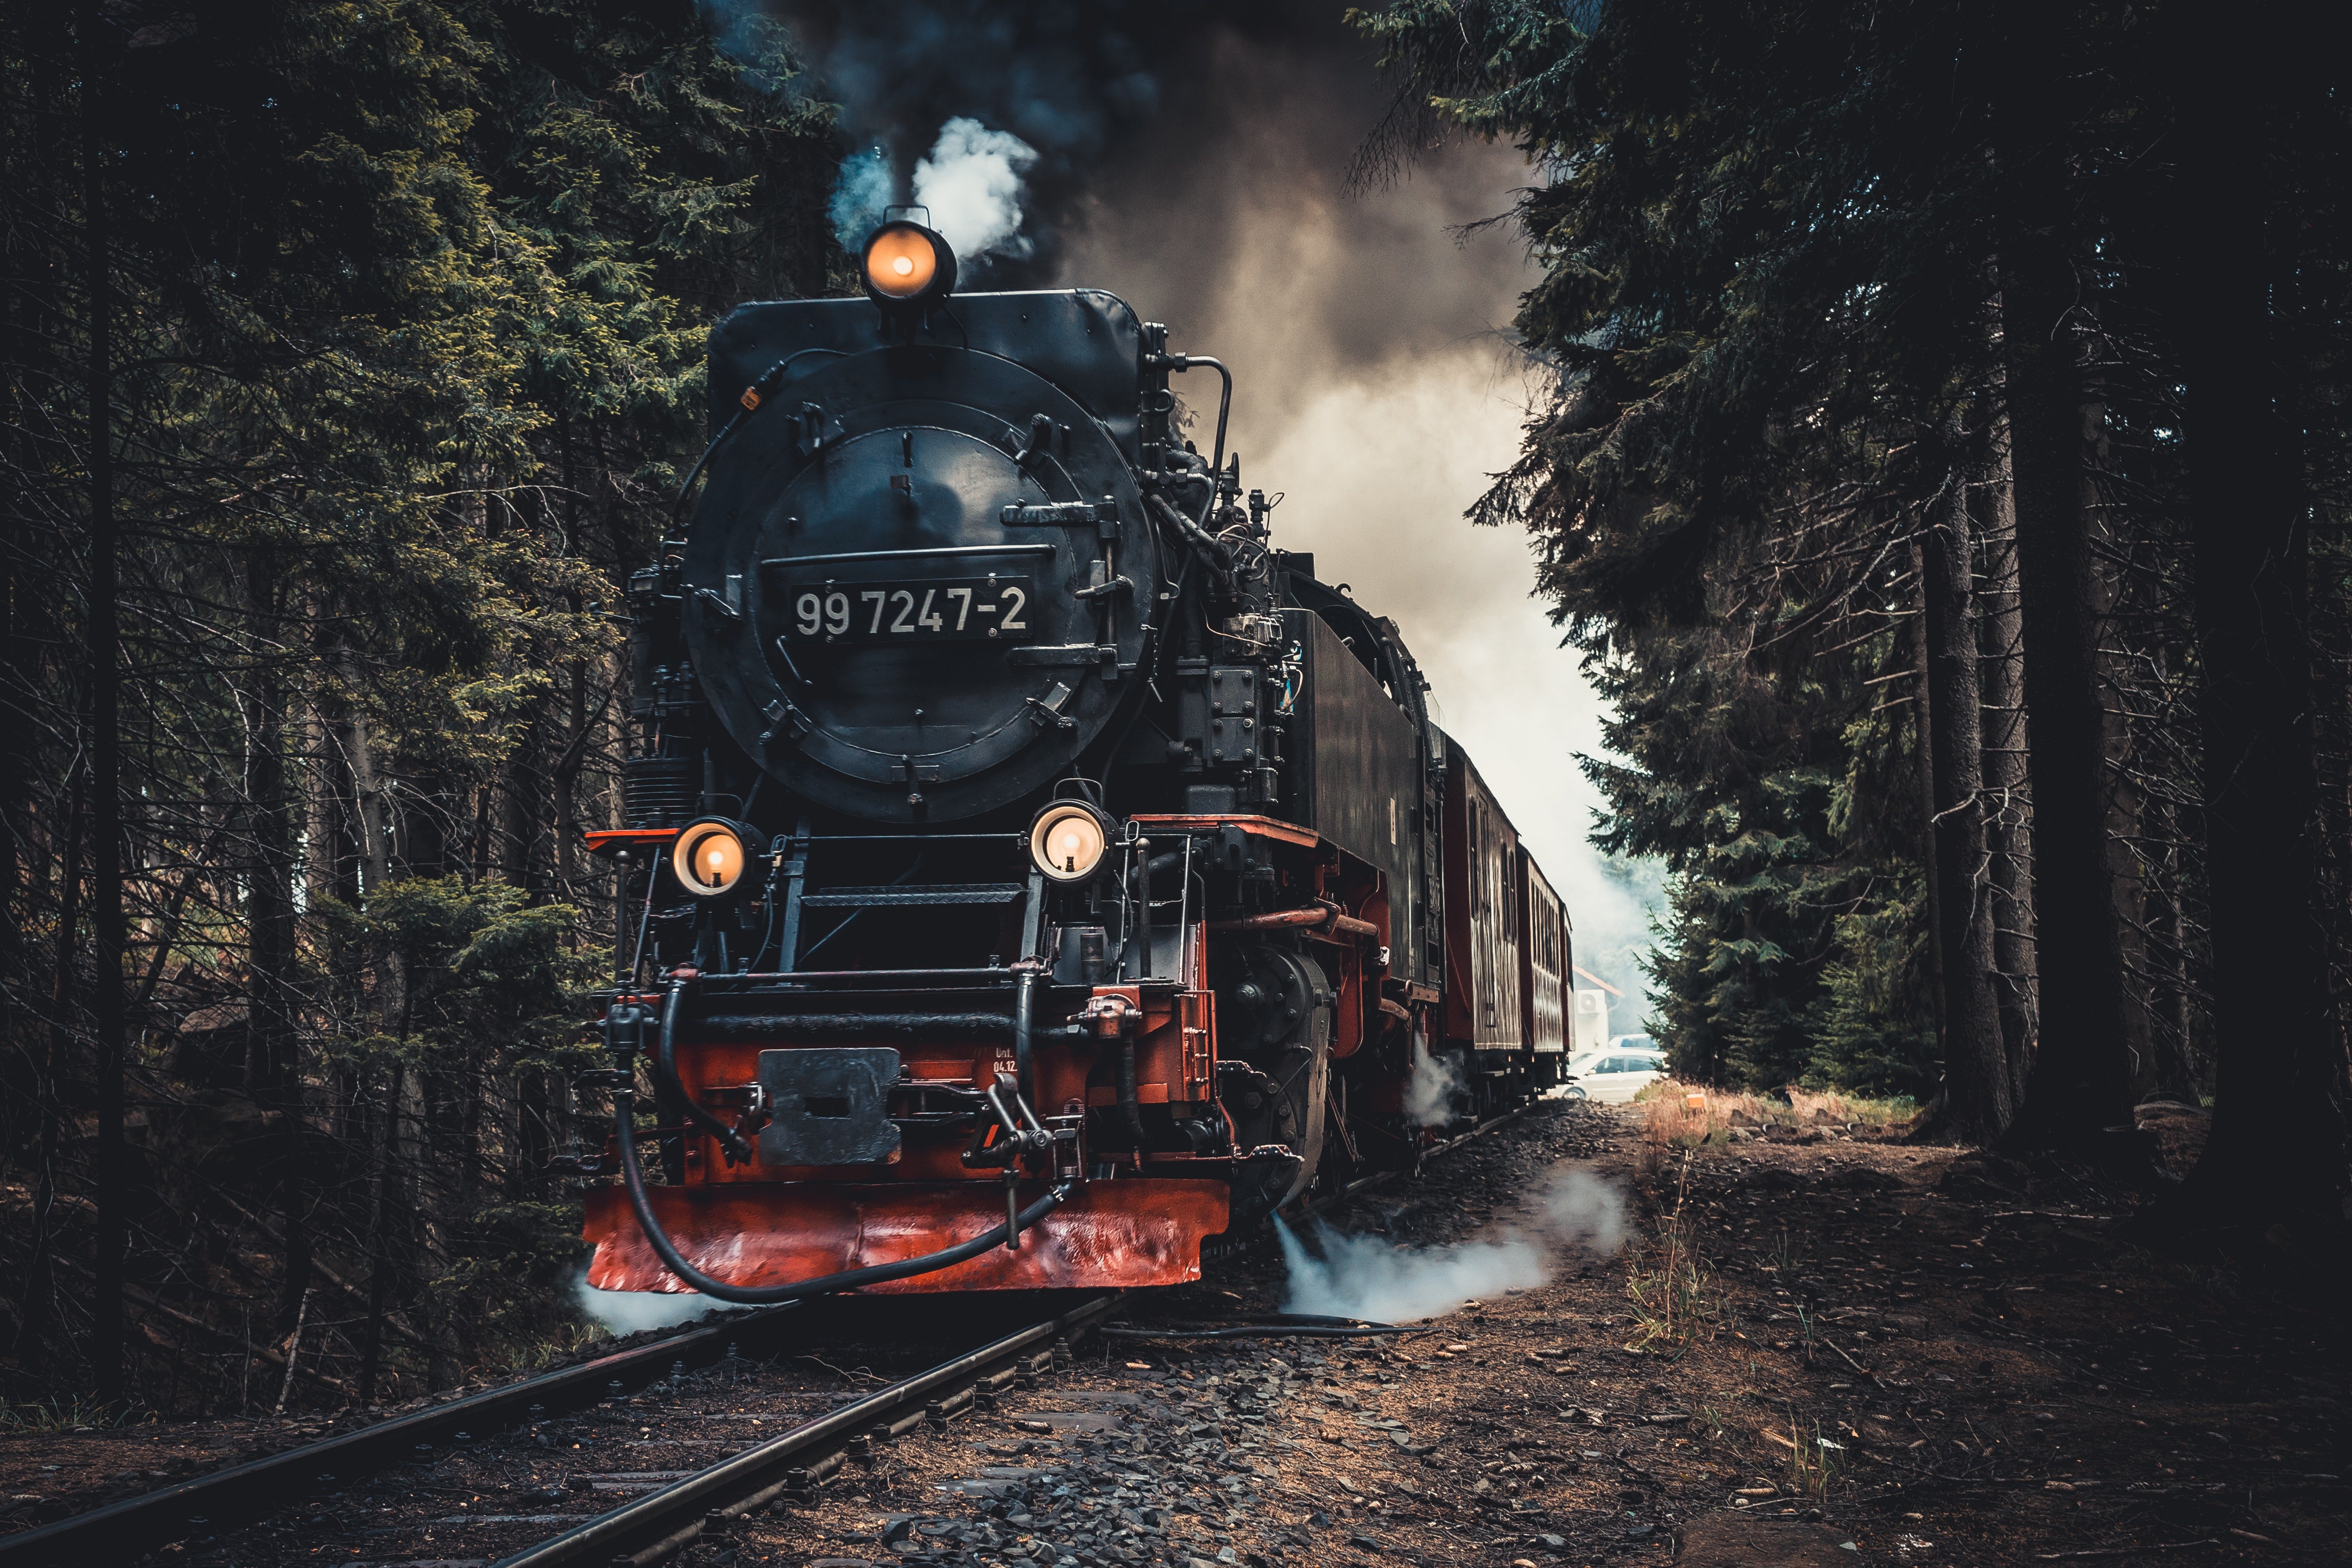 Pictured - A red and black train steam locomotive on a railway | Source: Pexels 